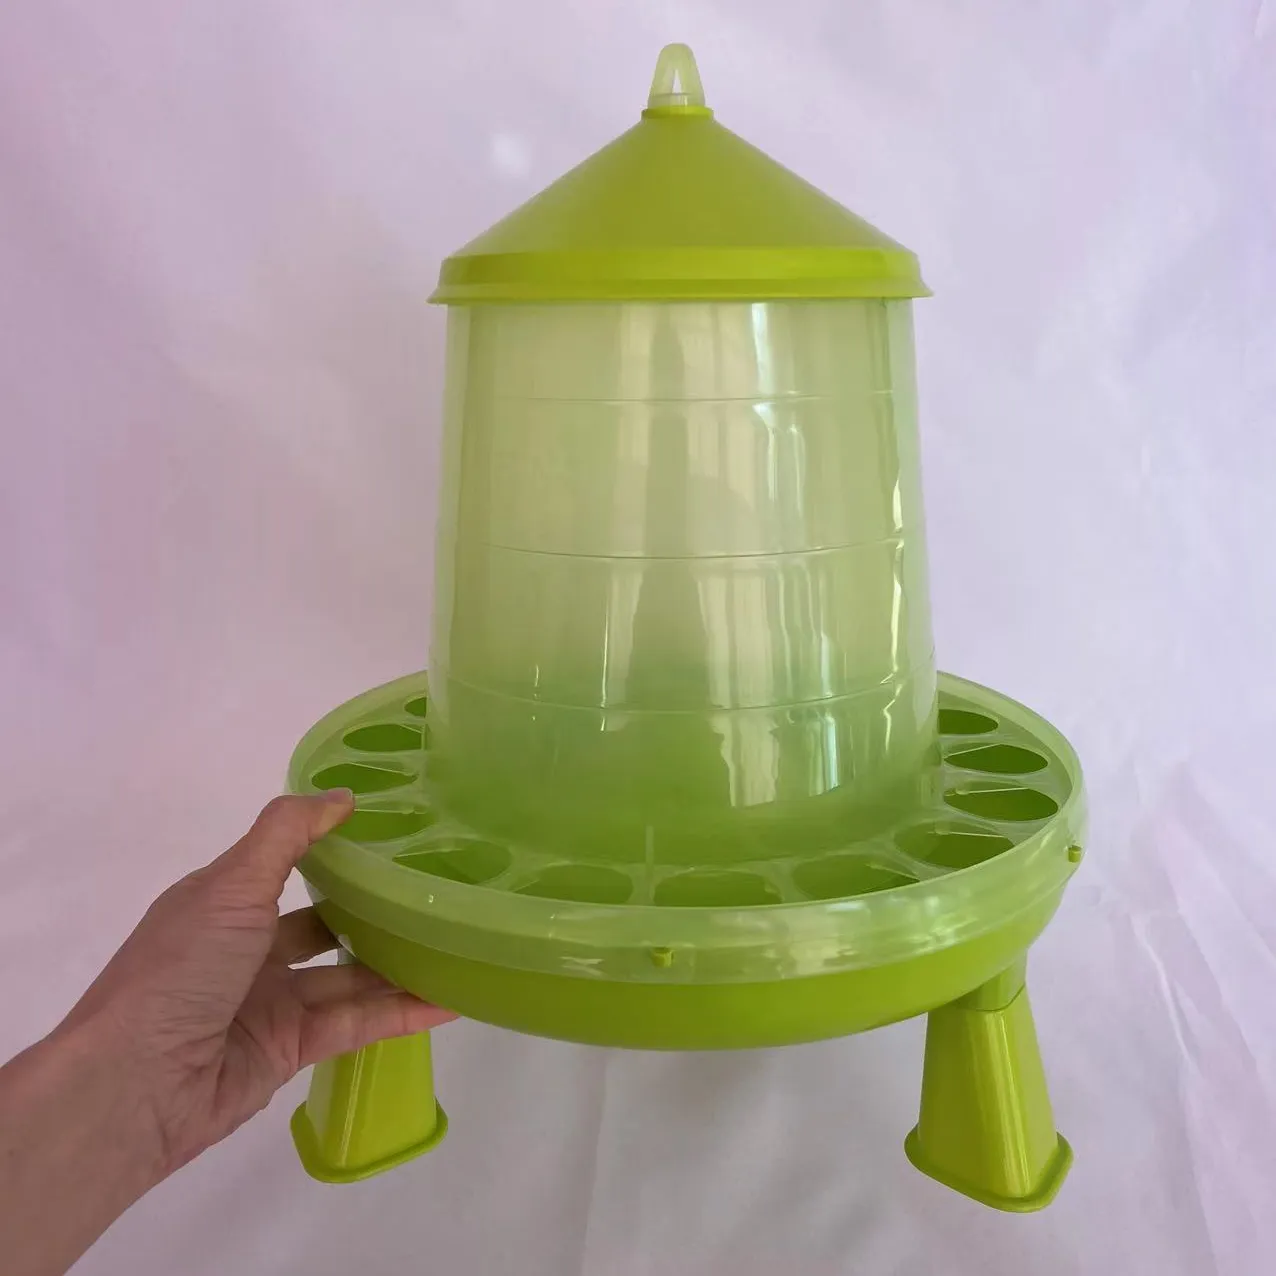 New 4kg green chicken feeders and drinkers plastic poultry feeder with legs